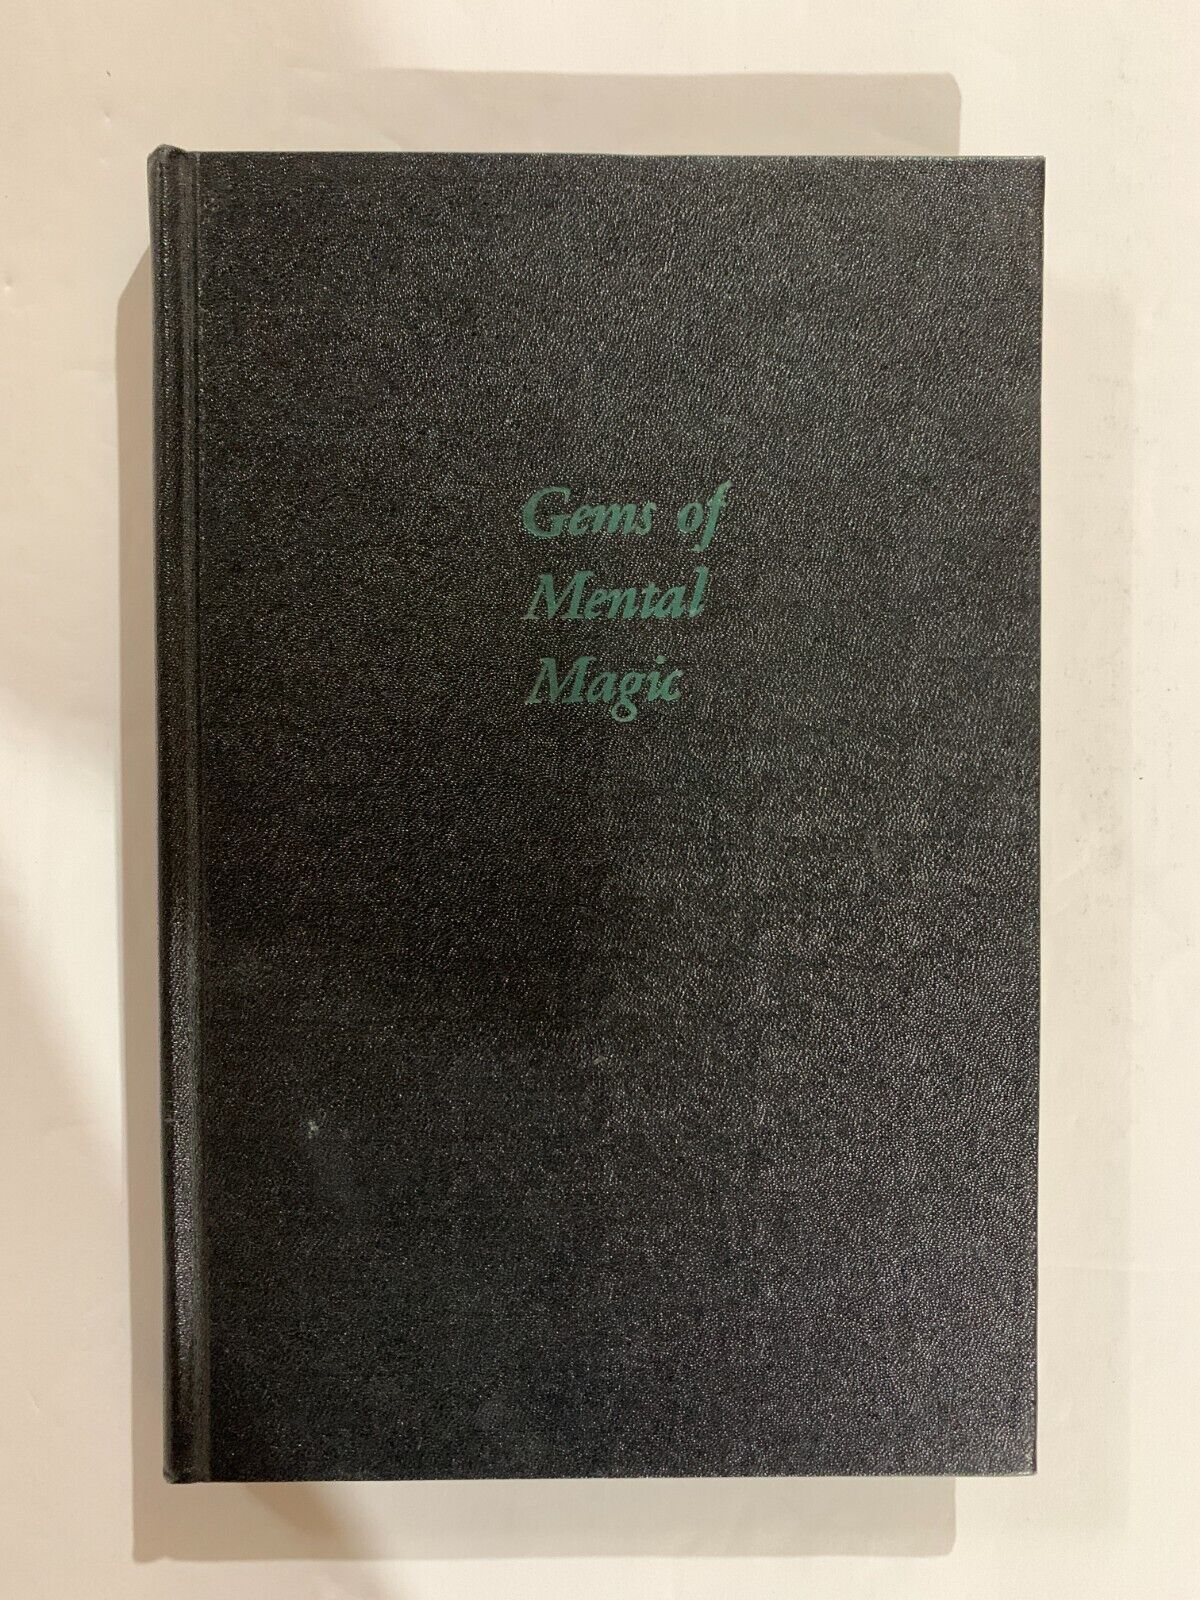 Gems of Mental Magic by John Brown Cook & Buckley 1947 First Edition Hardcover